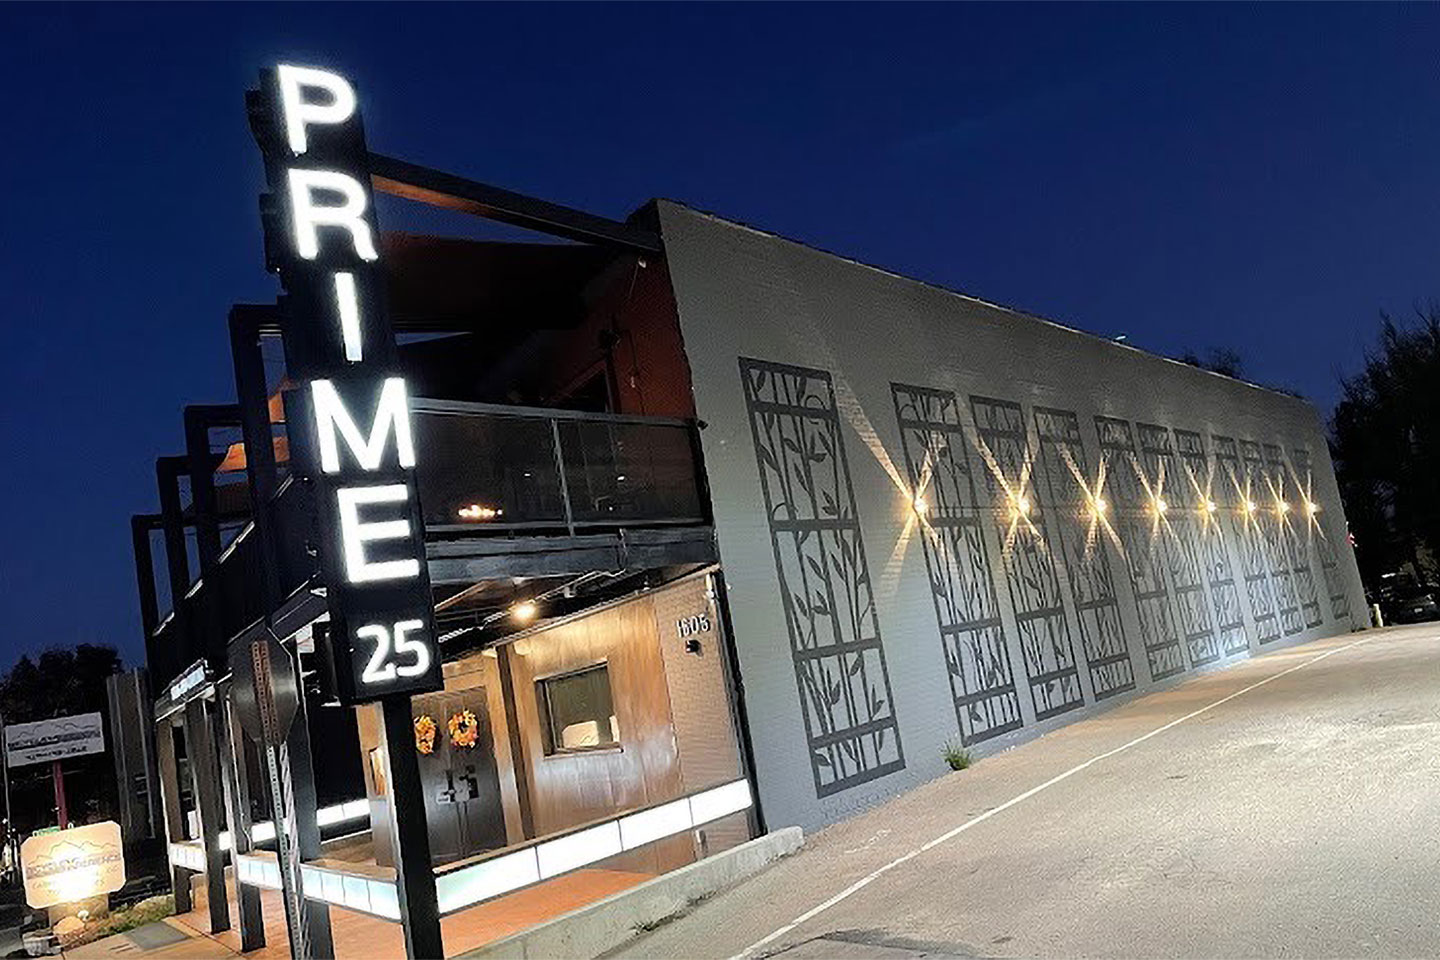 Everyone has heard of the new modern classic steakhouse Prime 25 in Colorado Springs. Prime 25 is the perfect restaurant to celebrate special occasions, including birthdays, weddings, anniversaries and other special events. https://www.prime25.com